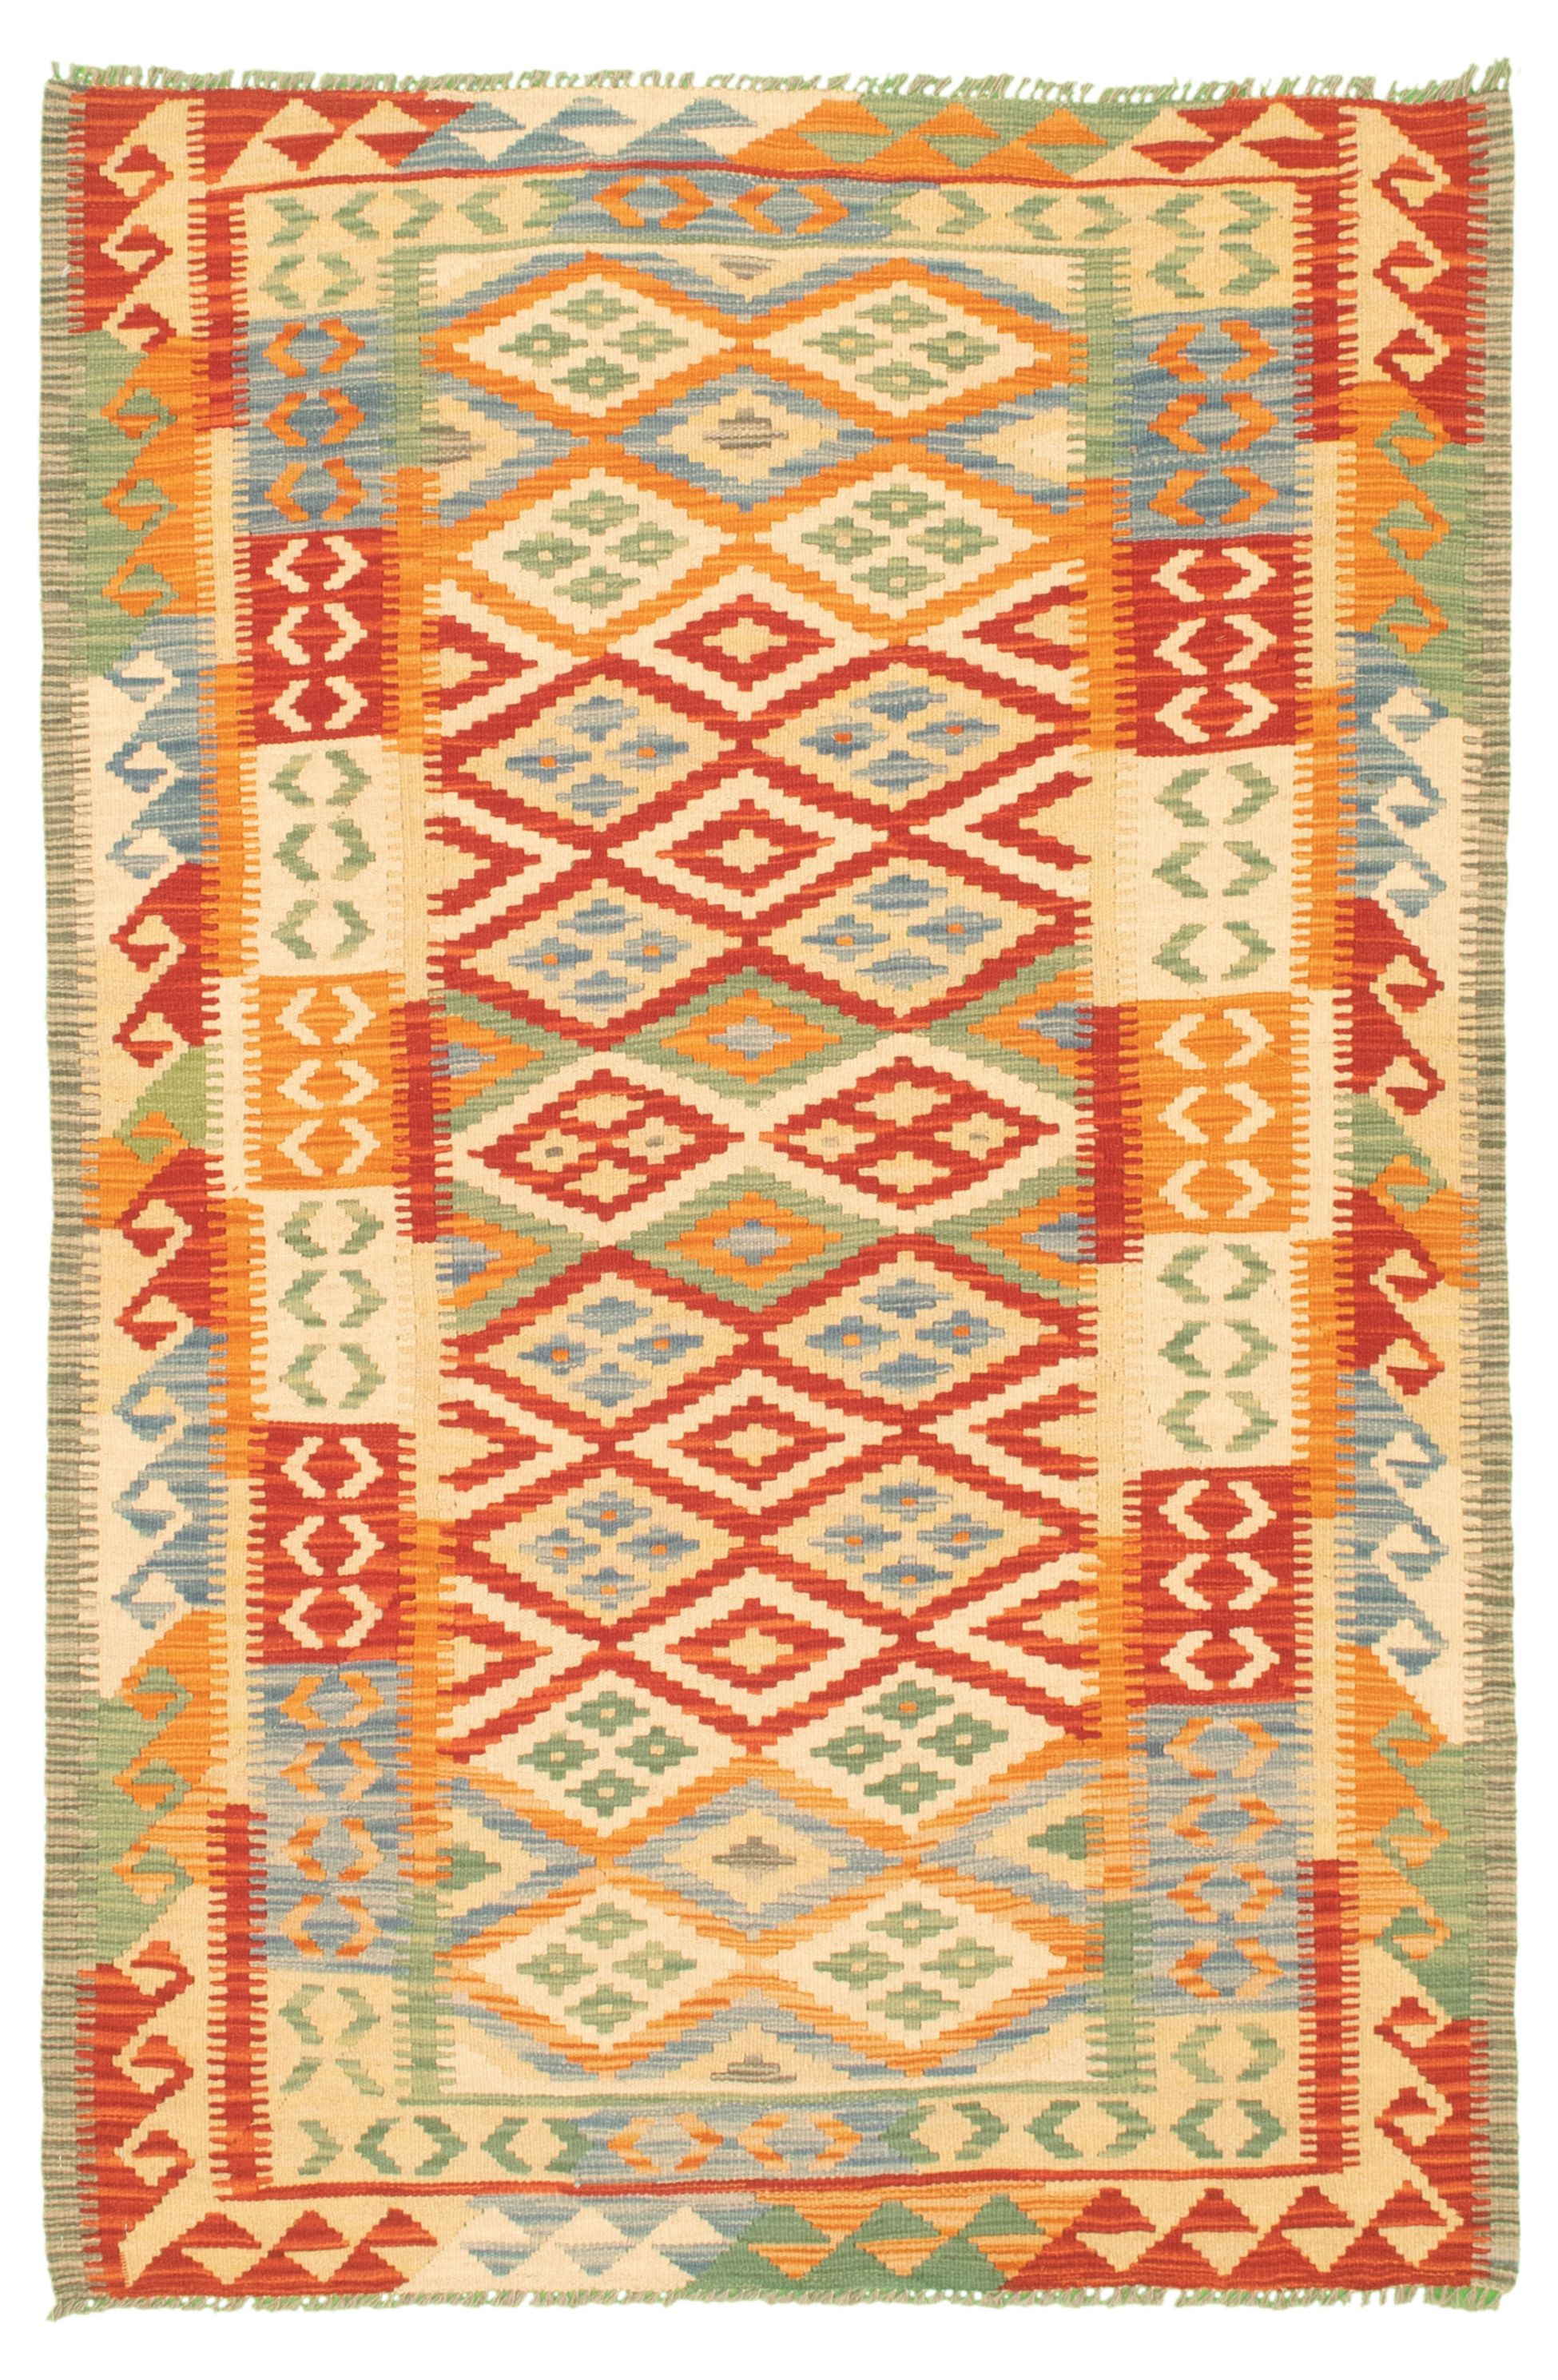 Hand woven Bold and Colorful  Cream Wool Kilim 4'2" x 6'2" Size: 4'2" x 6'2"  